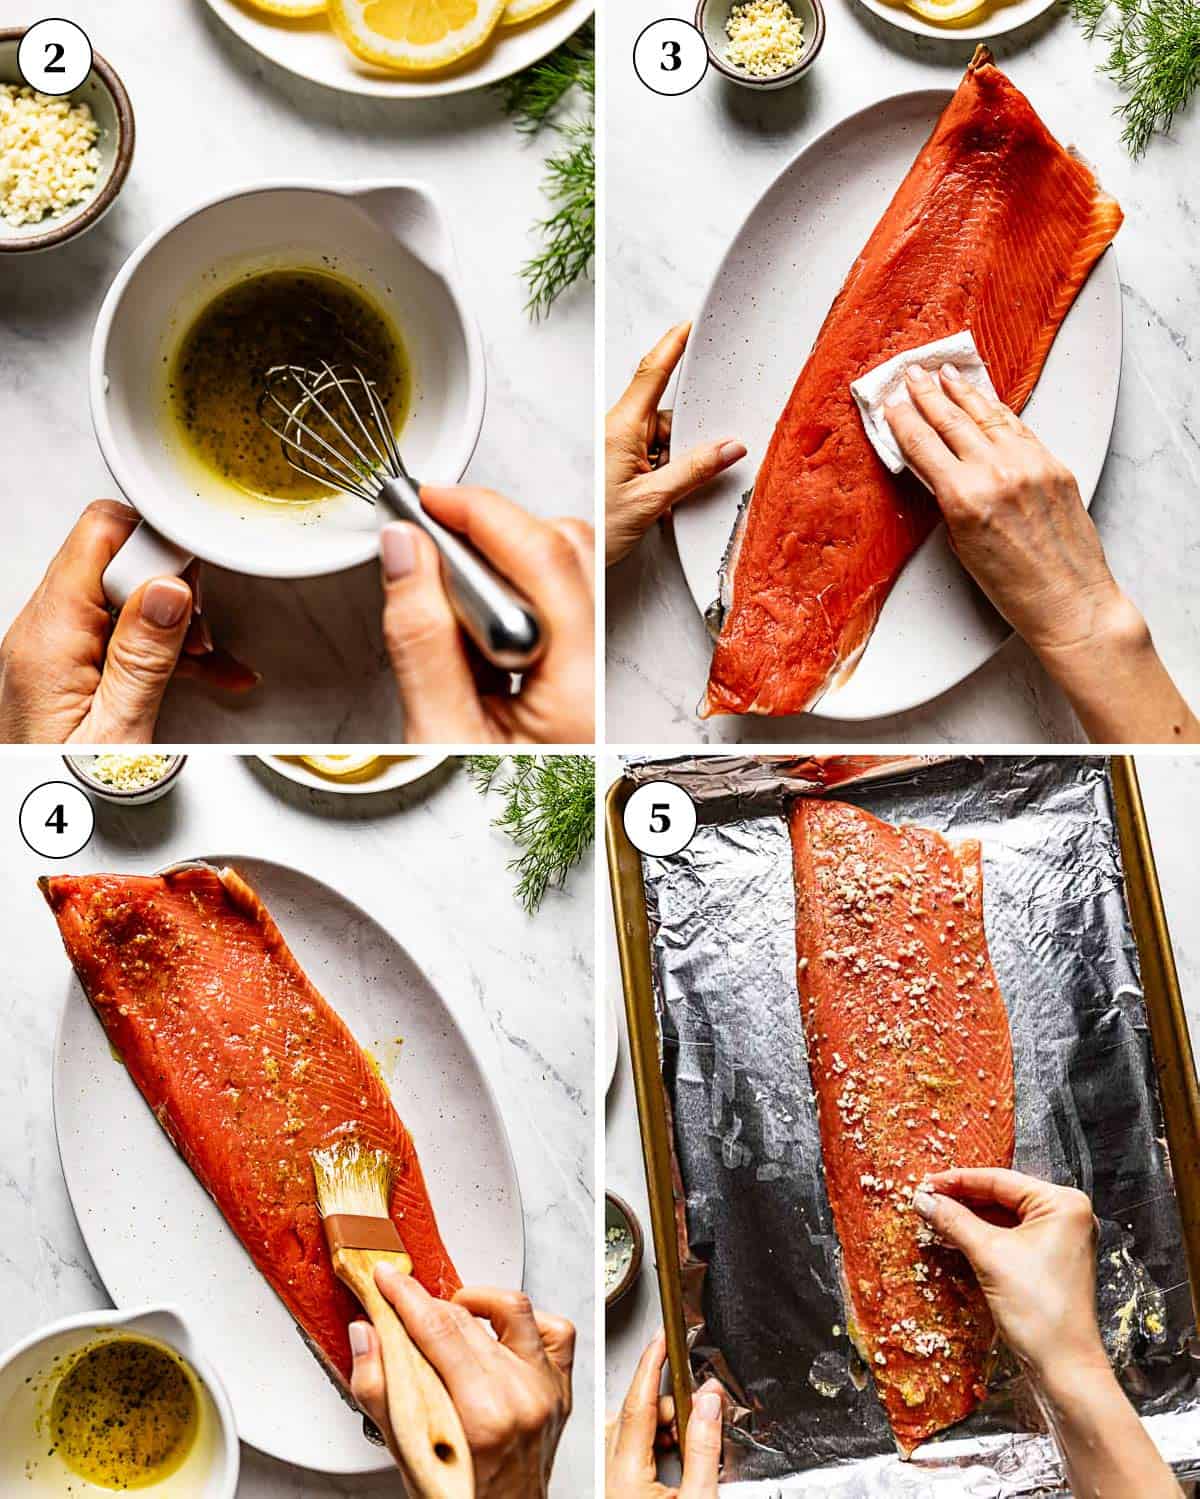 Step by step images showing how to bake Copper River salmon in the oven.